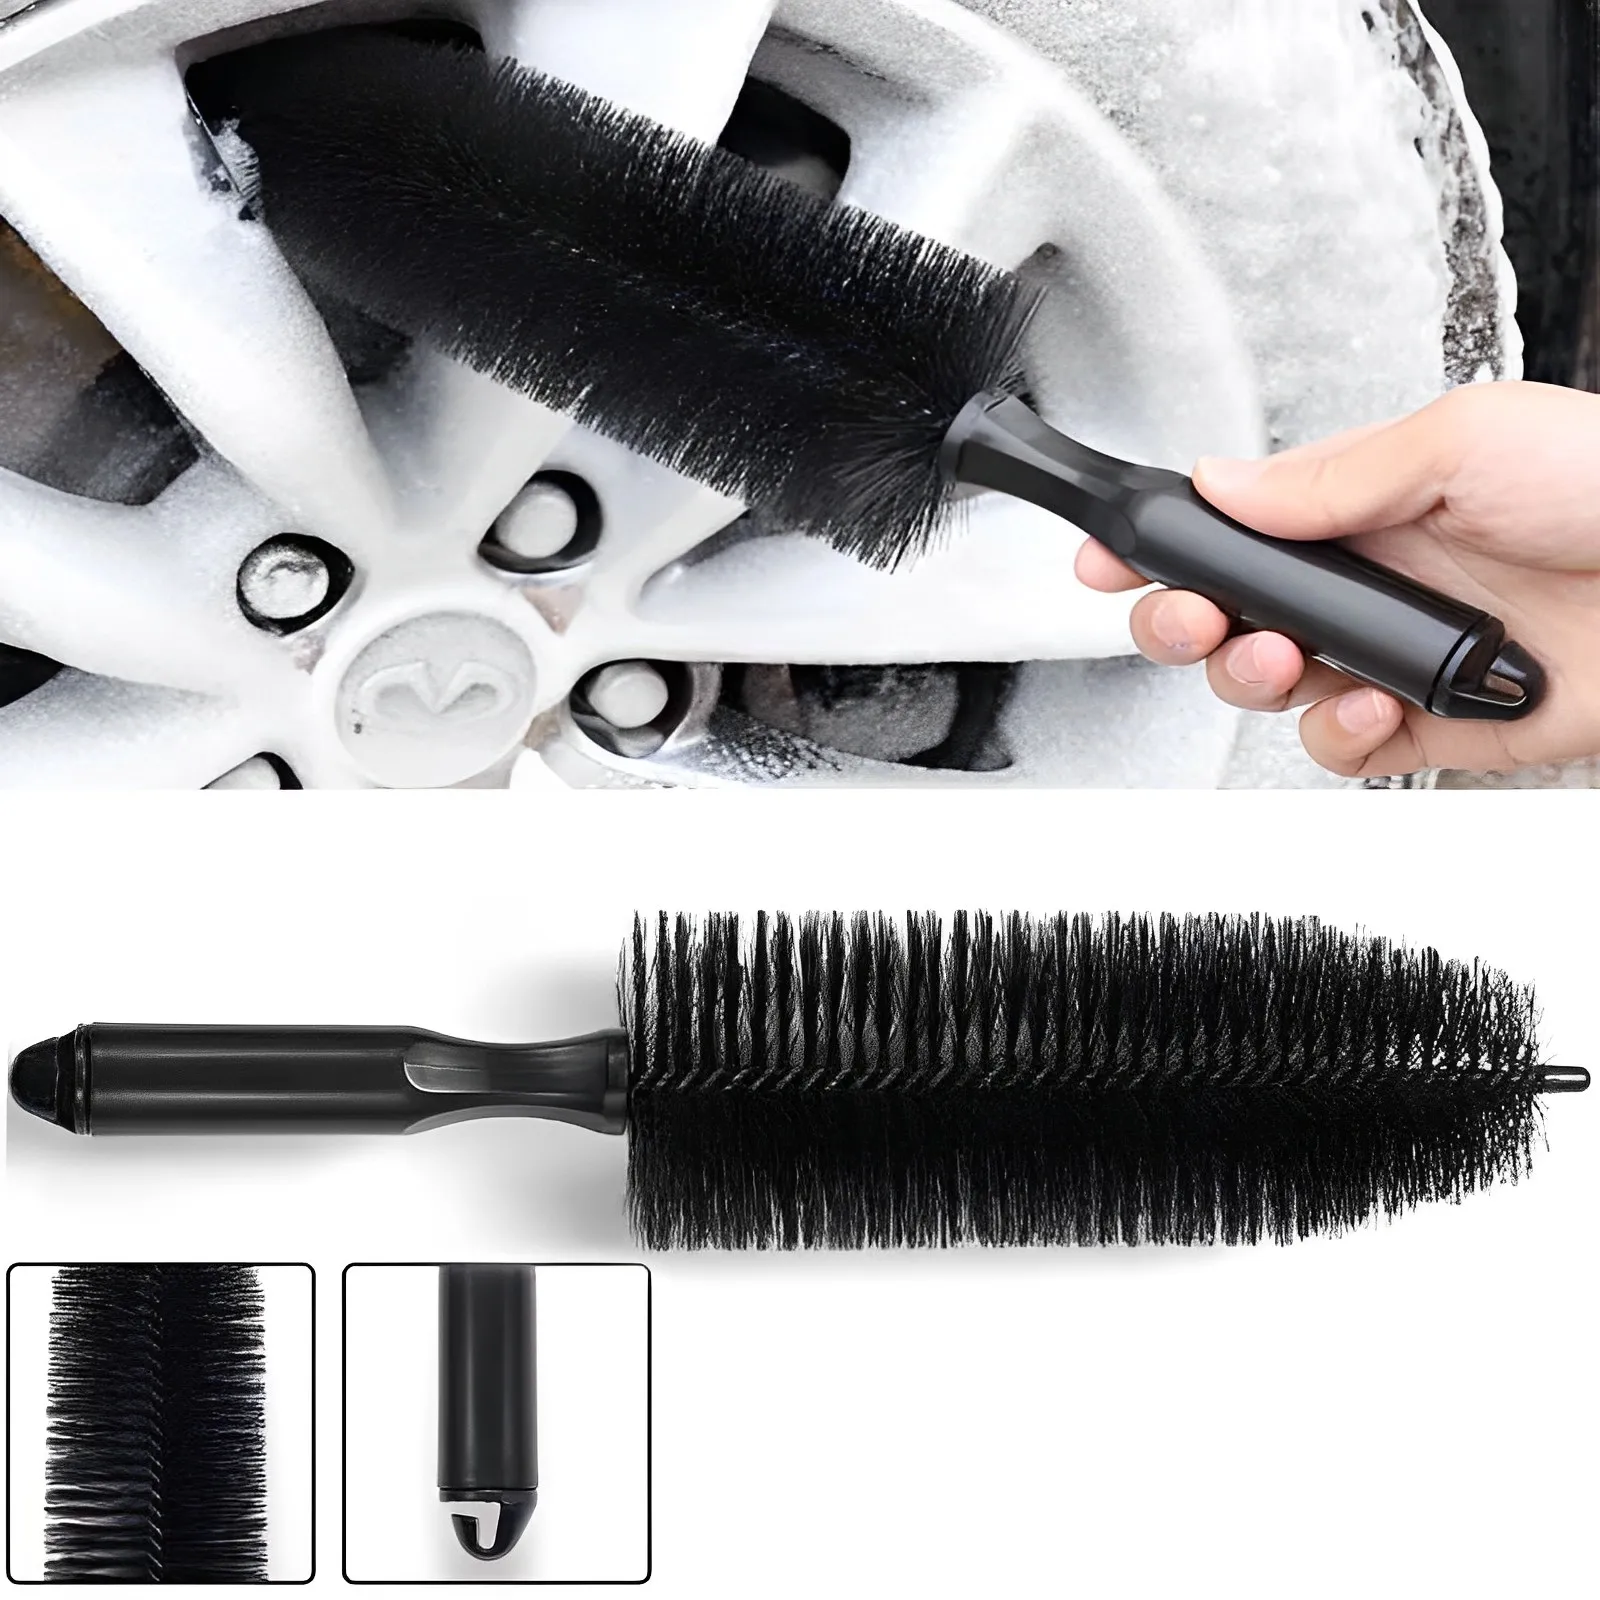 

Car Wheel Tire Wash Cleaning Brush Car Rim Scrubber Cleaner Duster Handle Car Tyre Cleaning Detailing Brushes Car Cleaning Tools